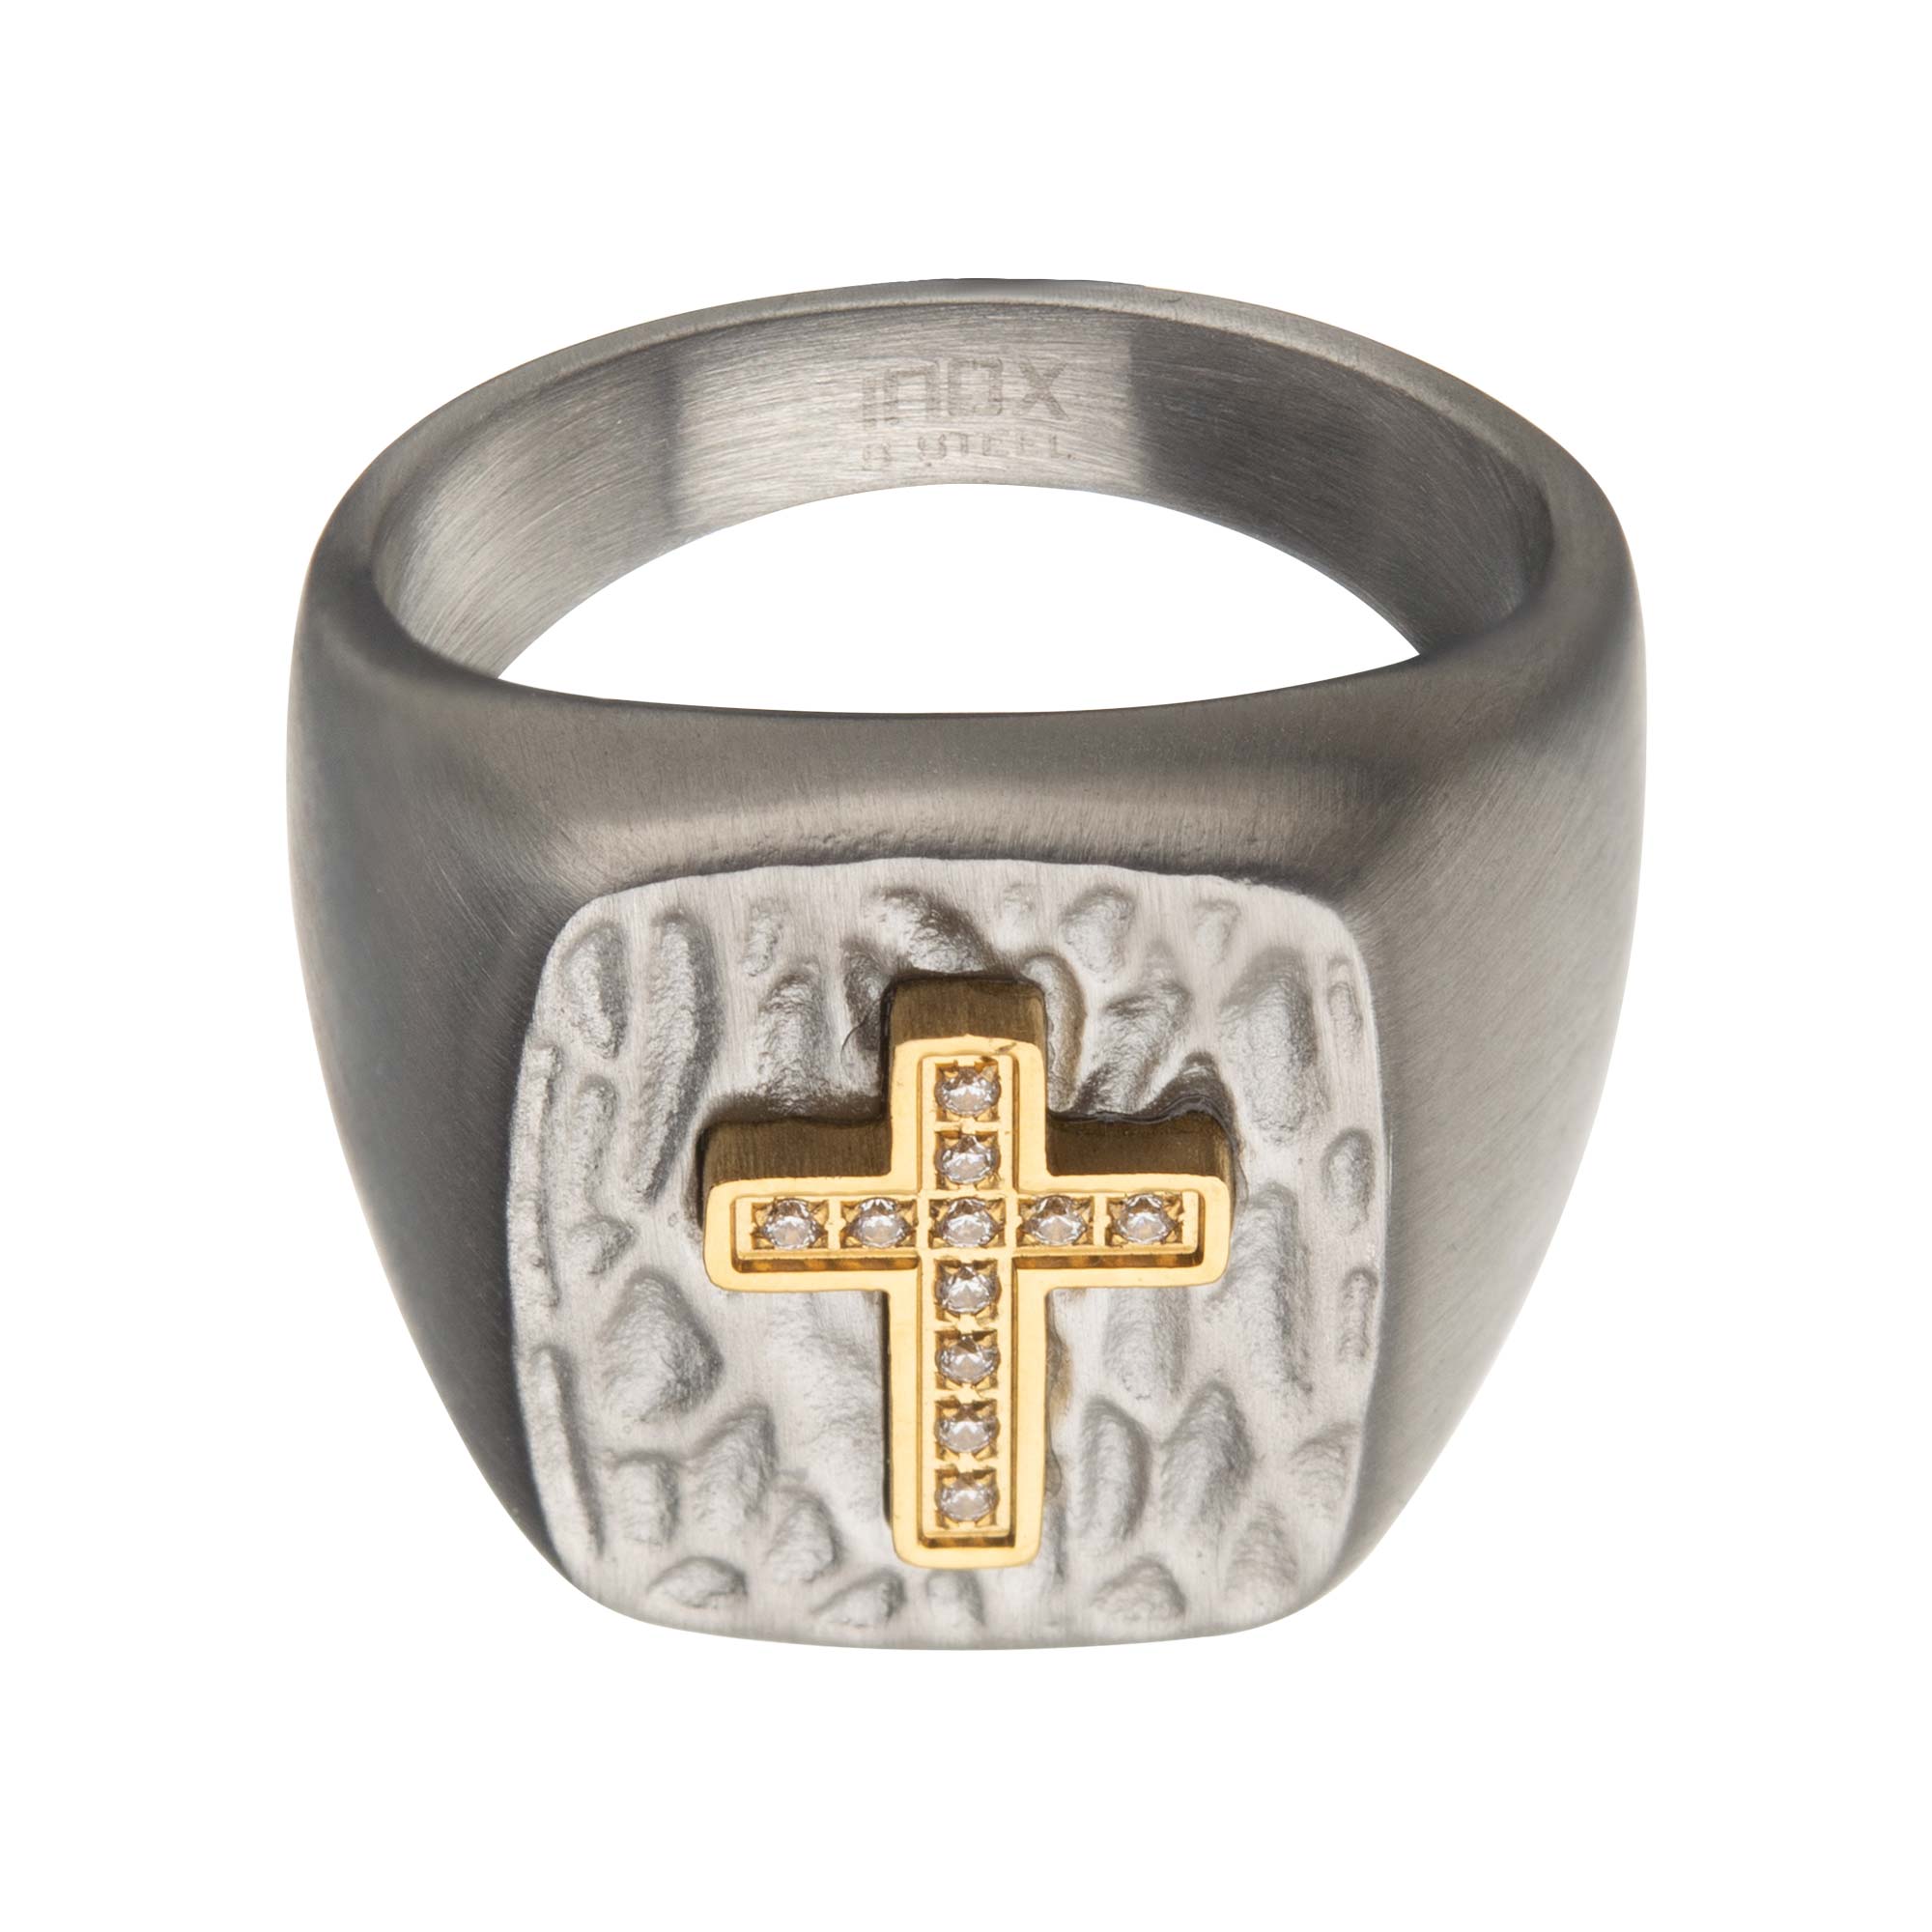 Gold Plated Cross with Clear CZs on Steel Hammered Signet Rings Image 2 Ken Walker Jewelers Gig Harbor, WA